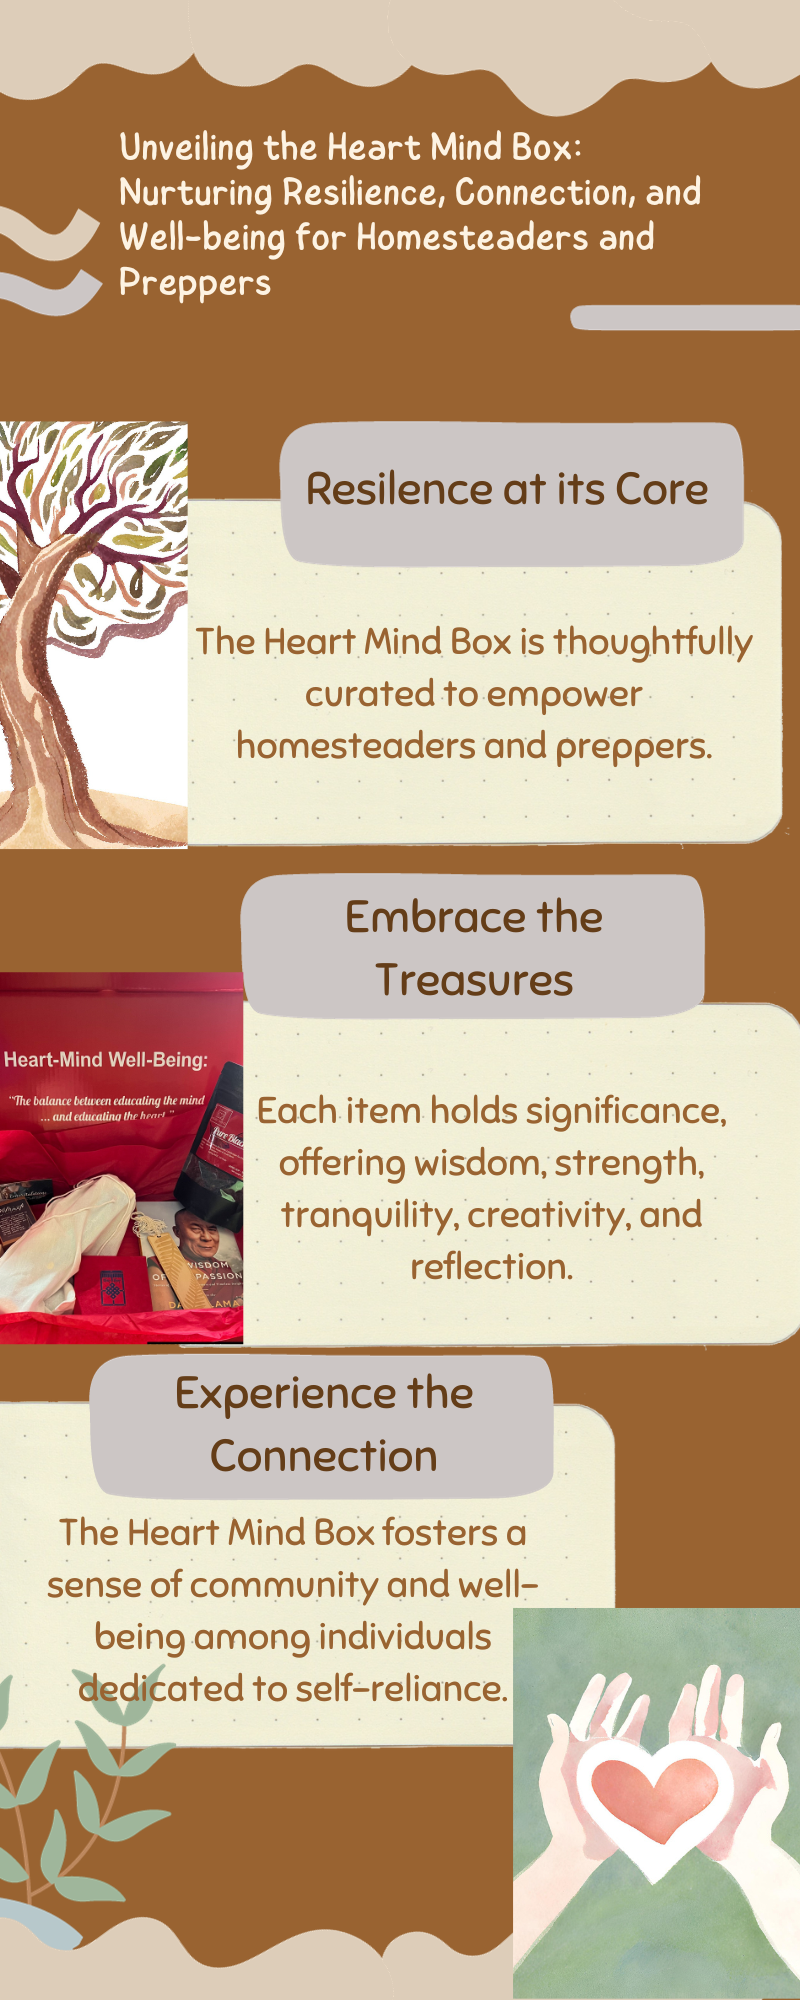 The infographic for the heart mind box.